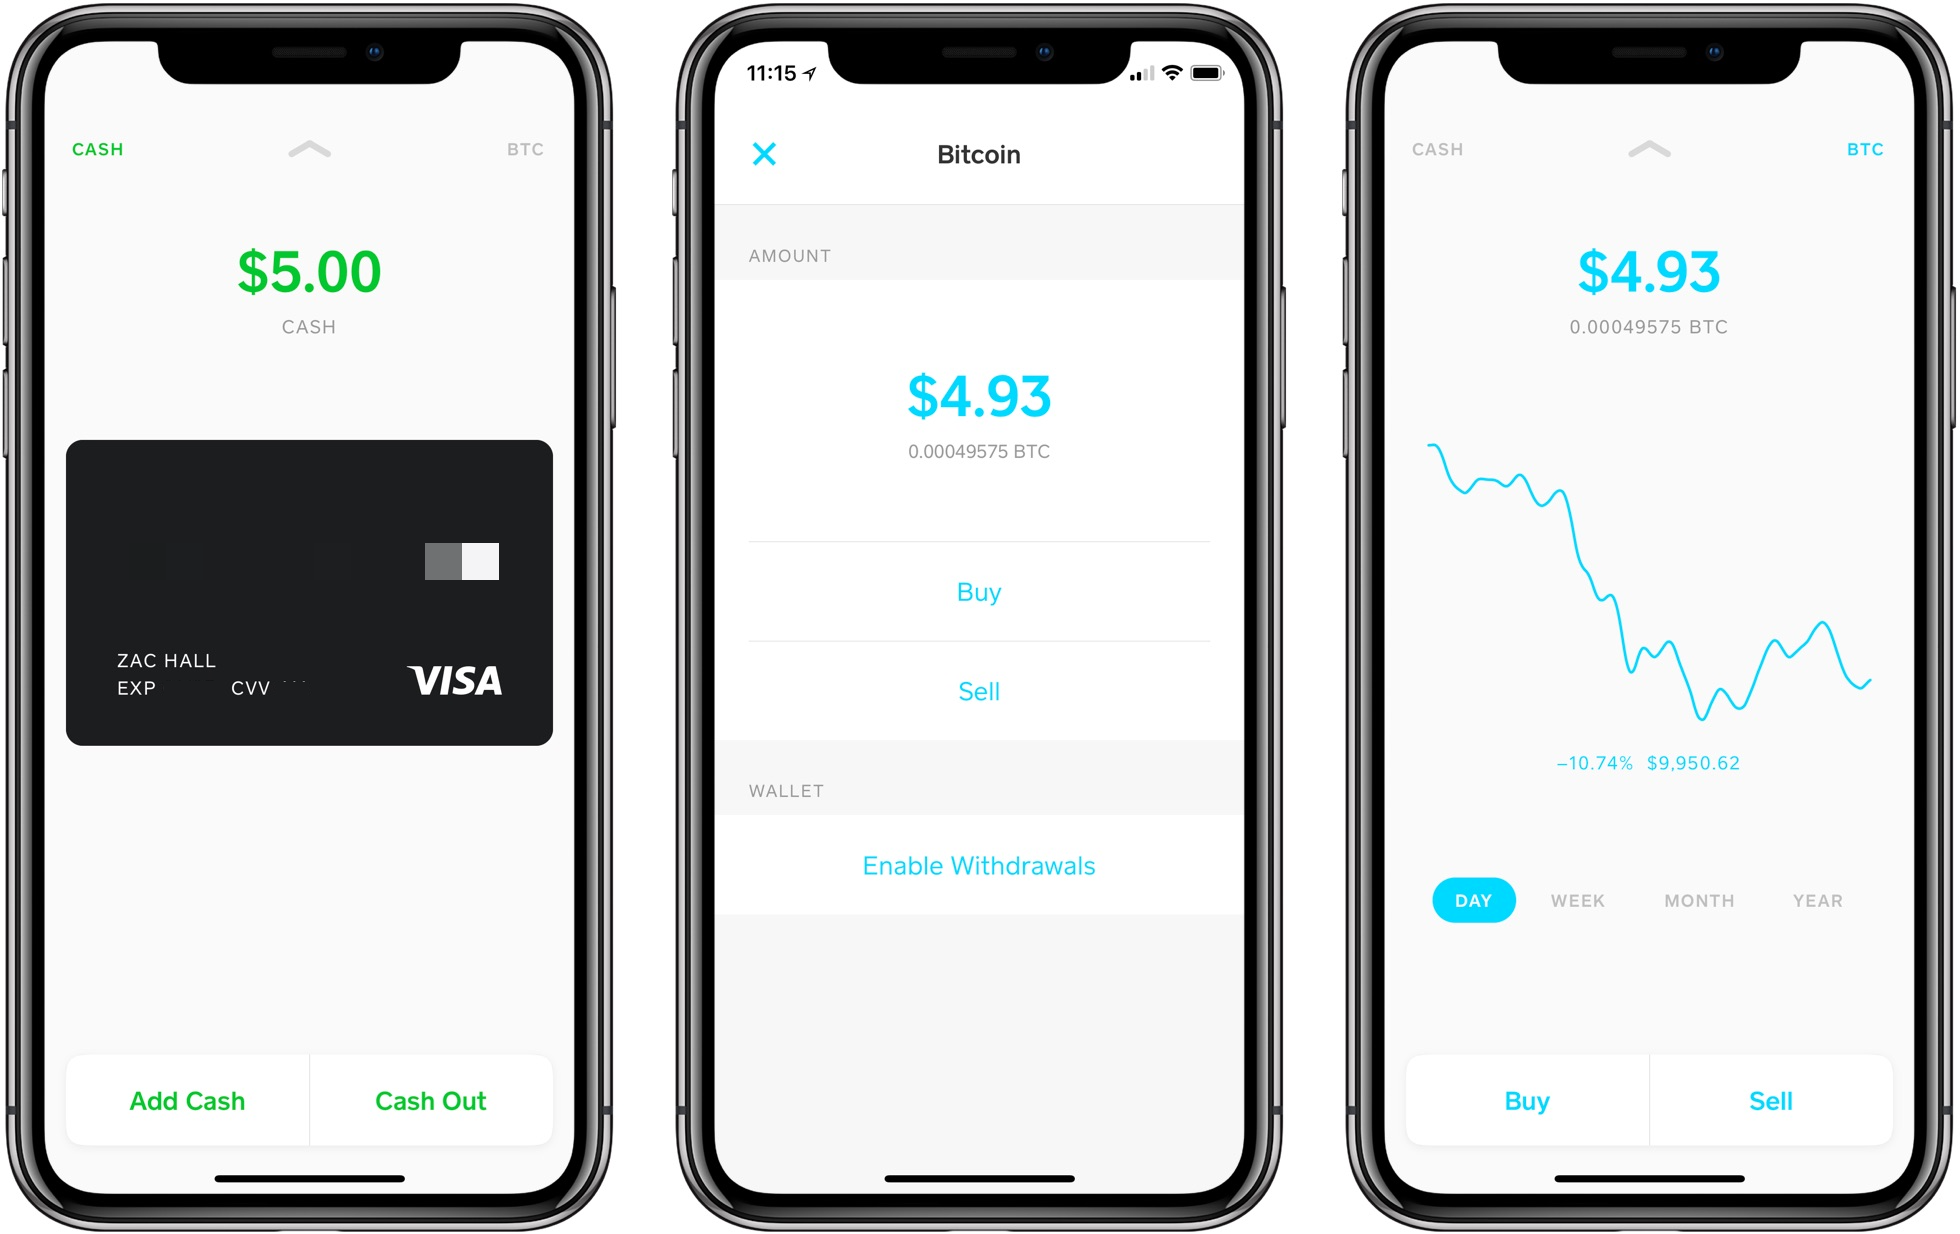 how to sell your bitcoin on cash app